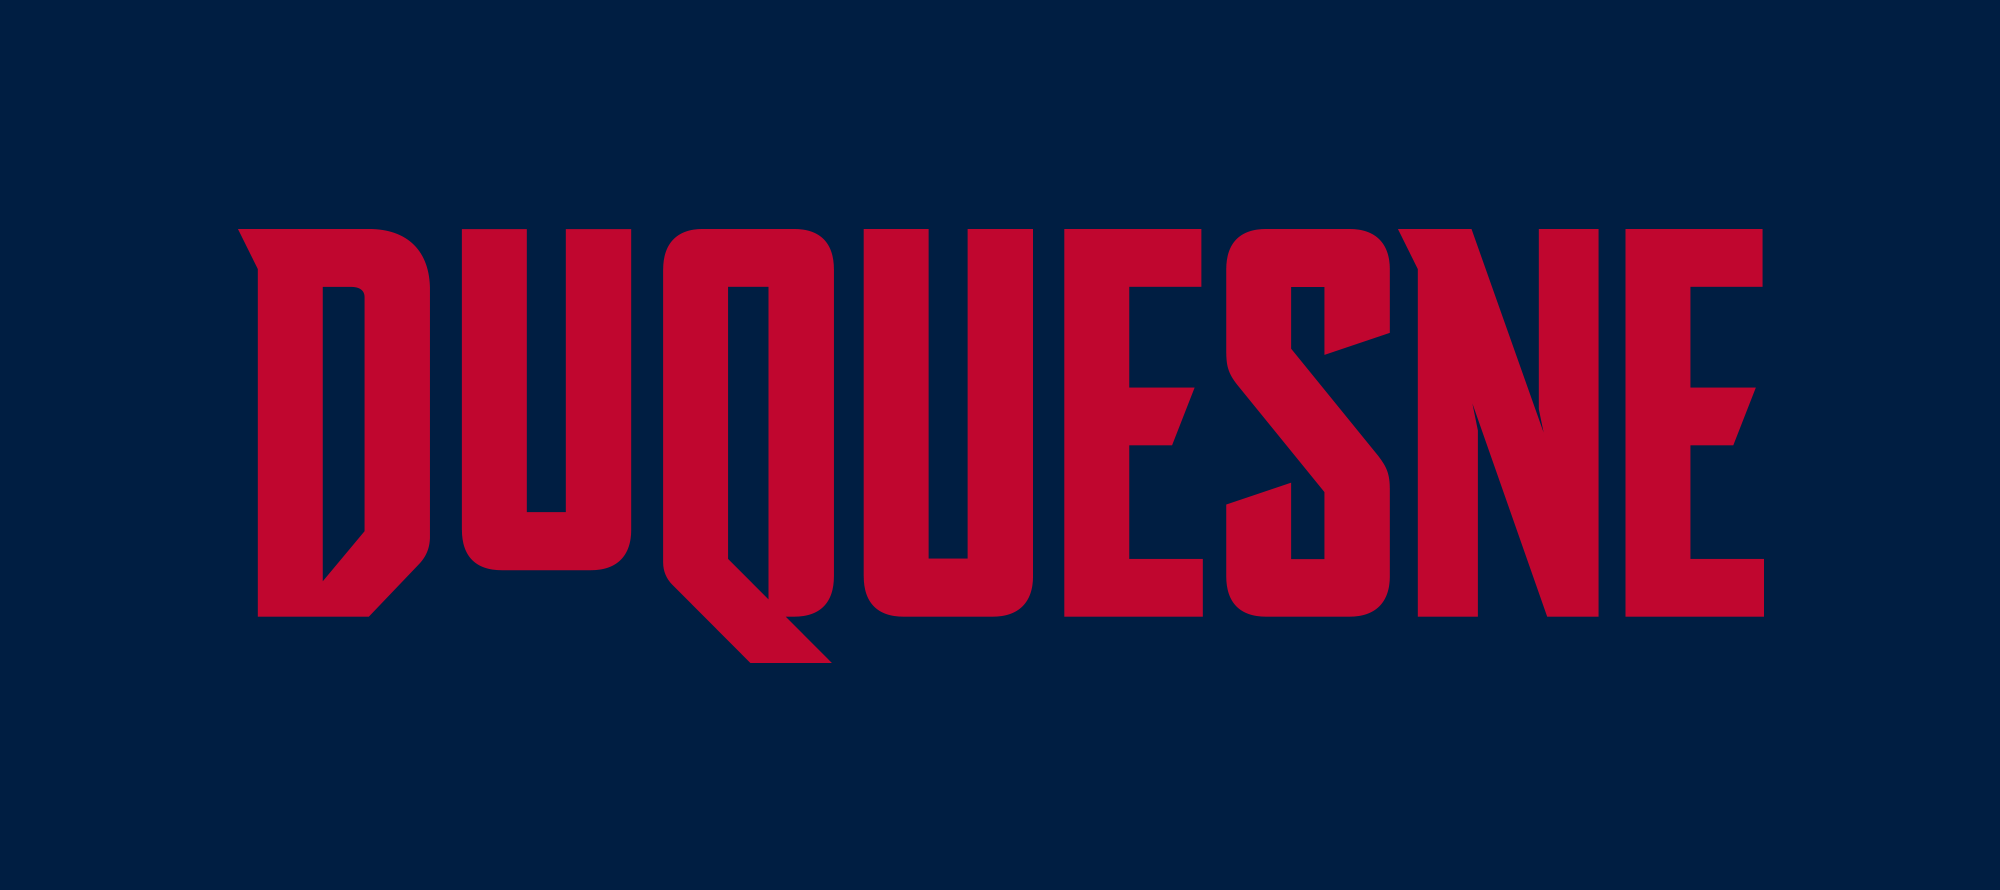 Duquesne Logo - Brand New: New Logo and Identity for Duquesne University Athletics ...